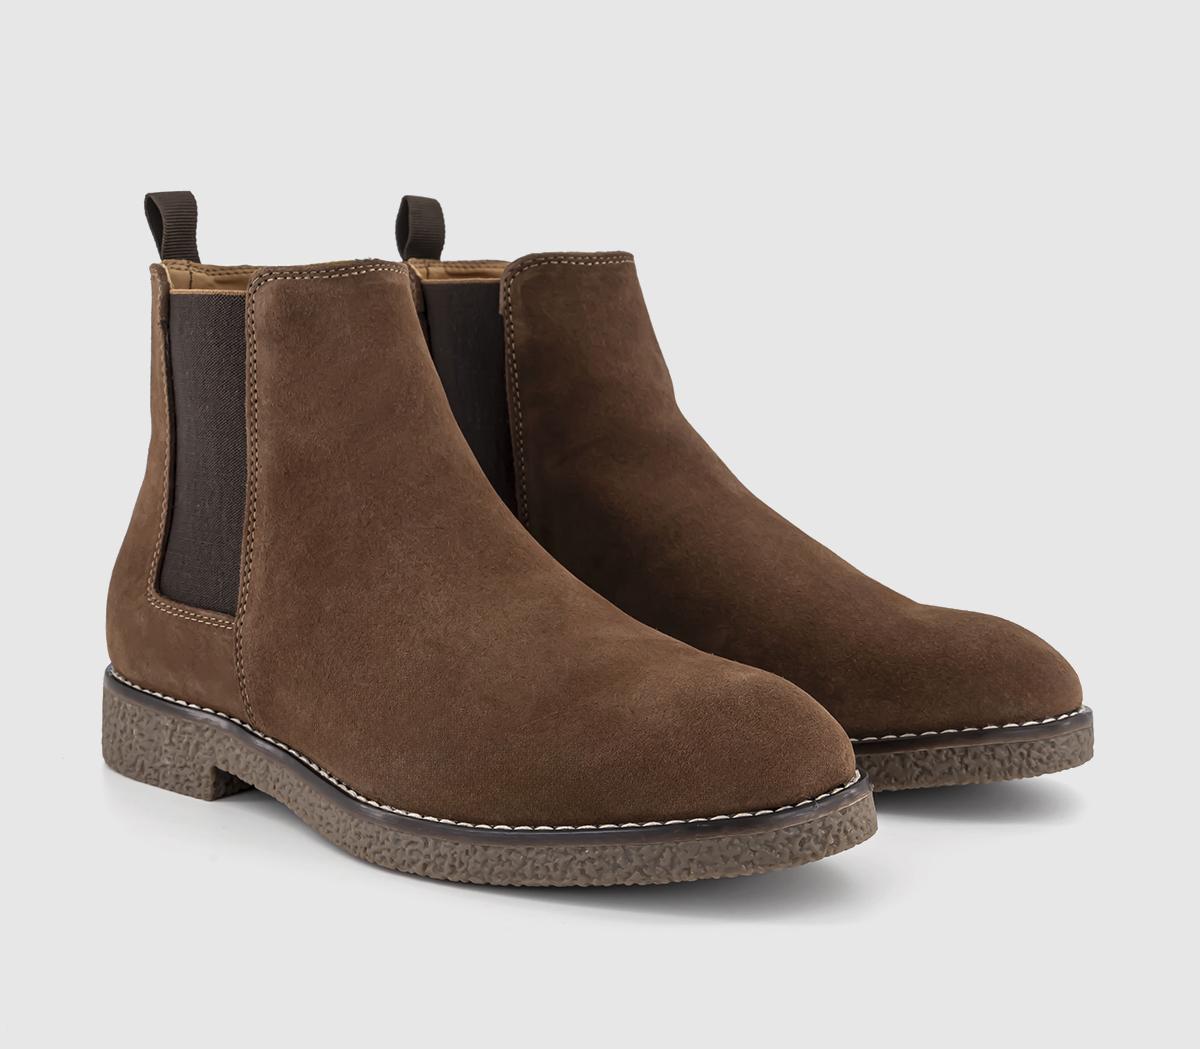 OFFICE Mens Bachelor Crepe Look Chelsea Boots Brown Suede, 7